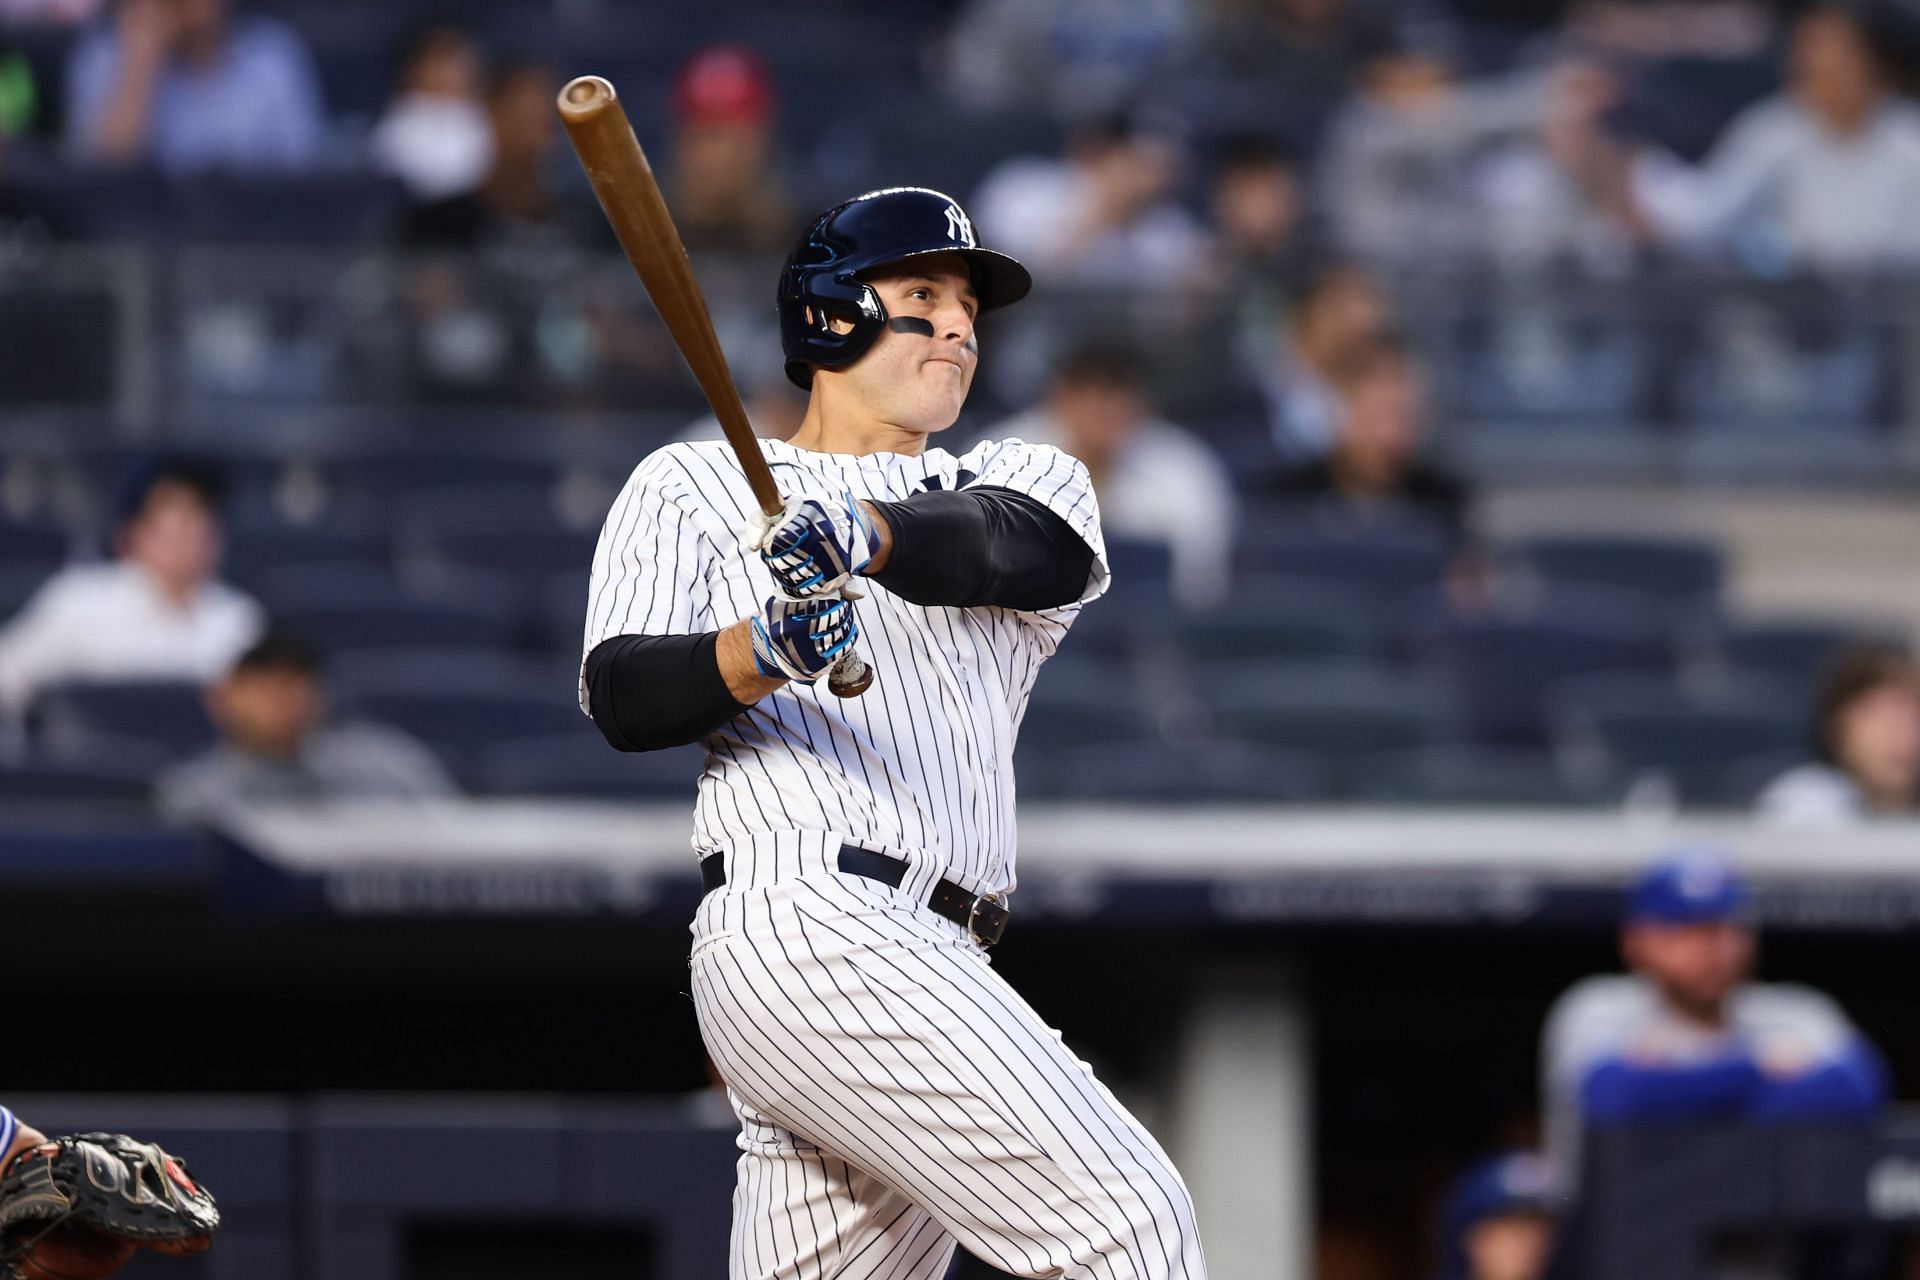 Anthony Rizzo has adjusted swing perfectly for Yankee Stadium